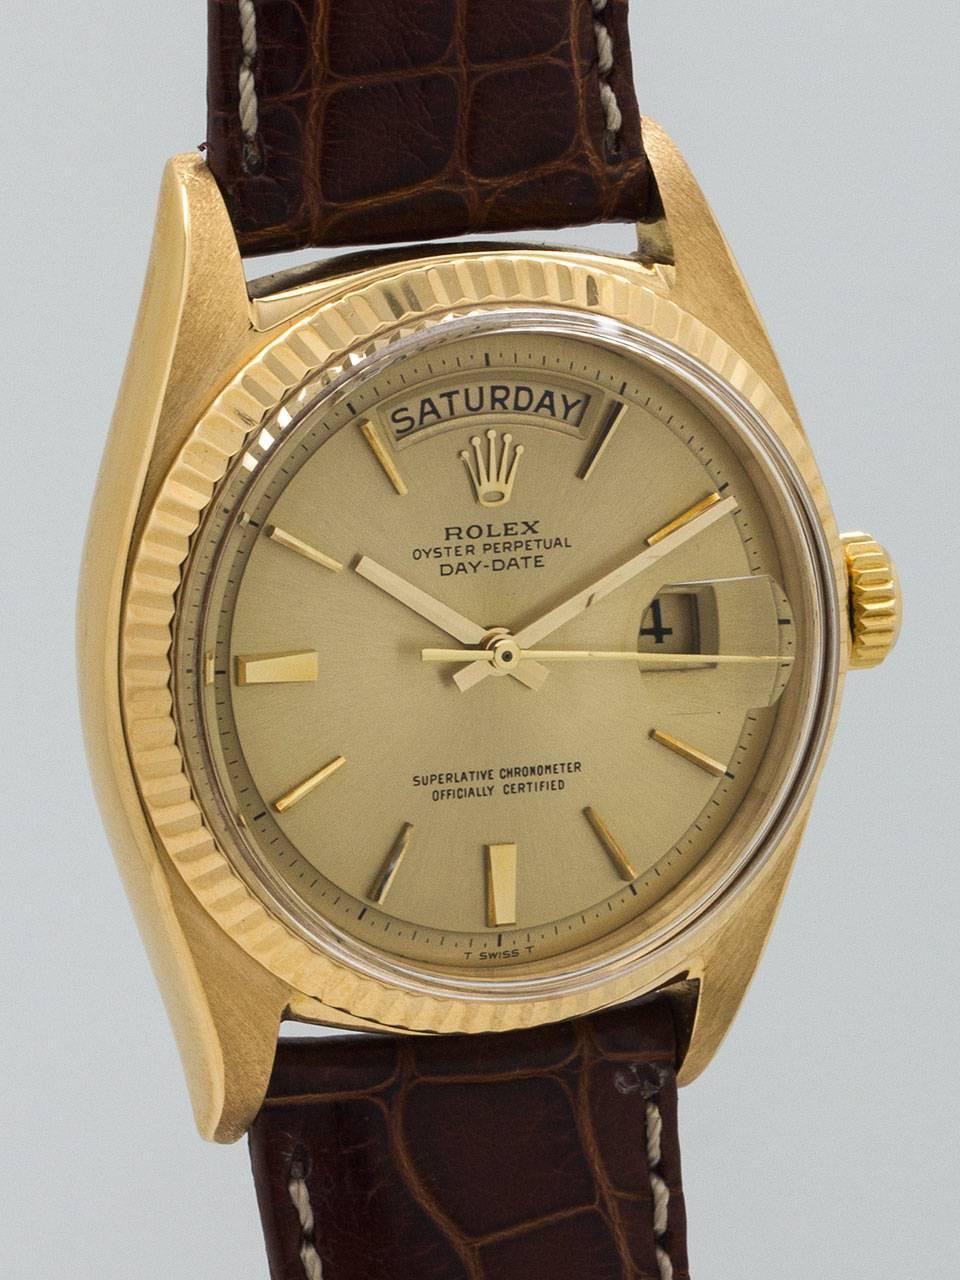 Rolex 18K Yellow Gold Day Date President ref 1803 serial #3.0 million circa 1972. 36mm diameter Oyster case with fluted bezel and acrylic crystal. Very pleasing original champagne pie pan dial with applied gold indexes and gold baton hands. Powered